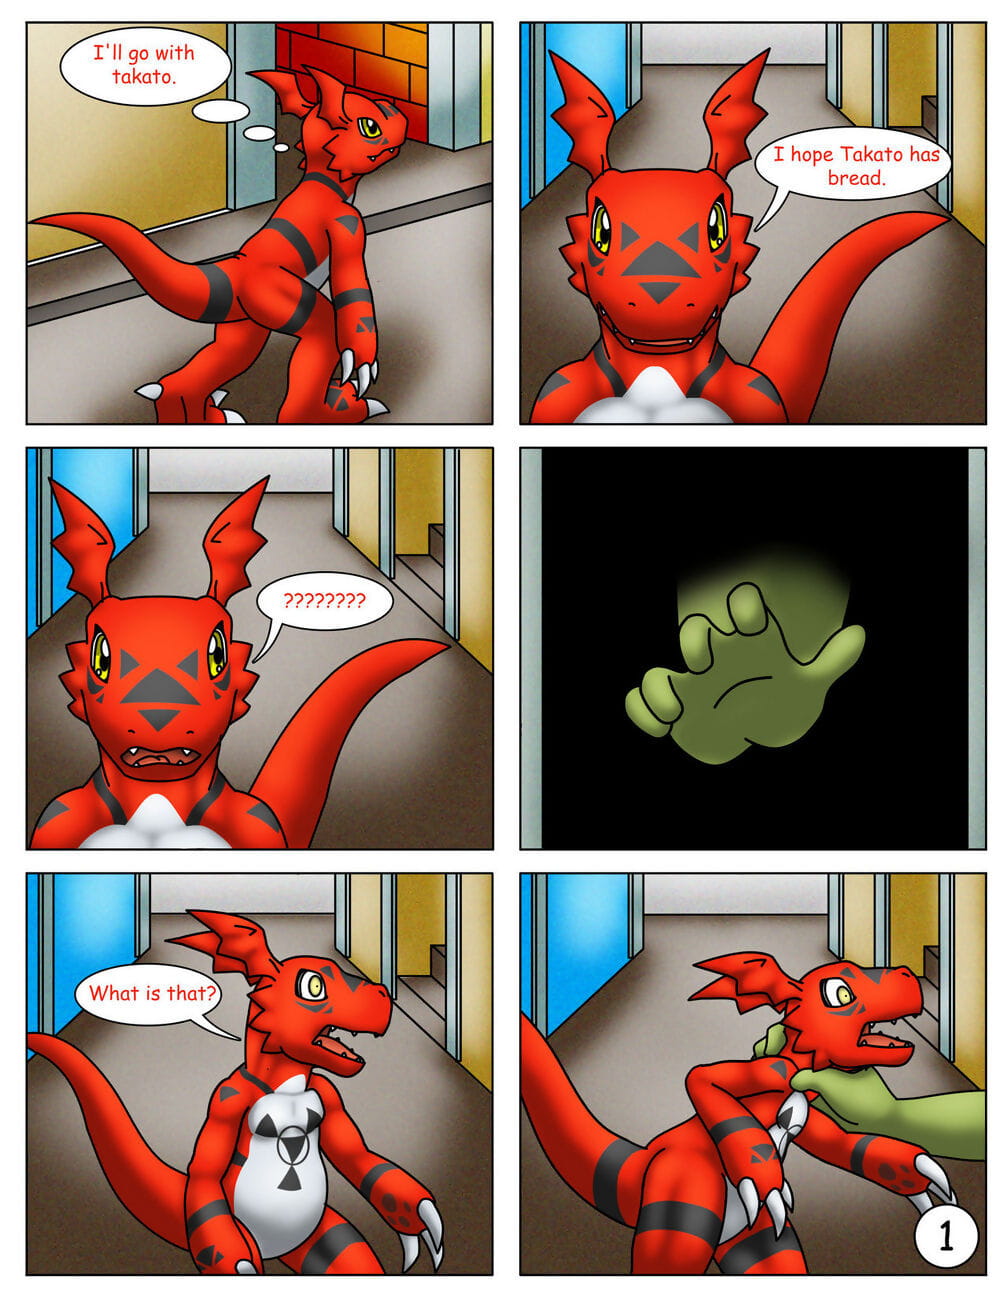 The Revenge Of Indramon page 1